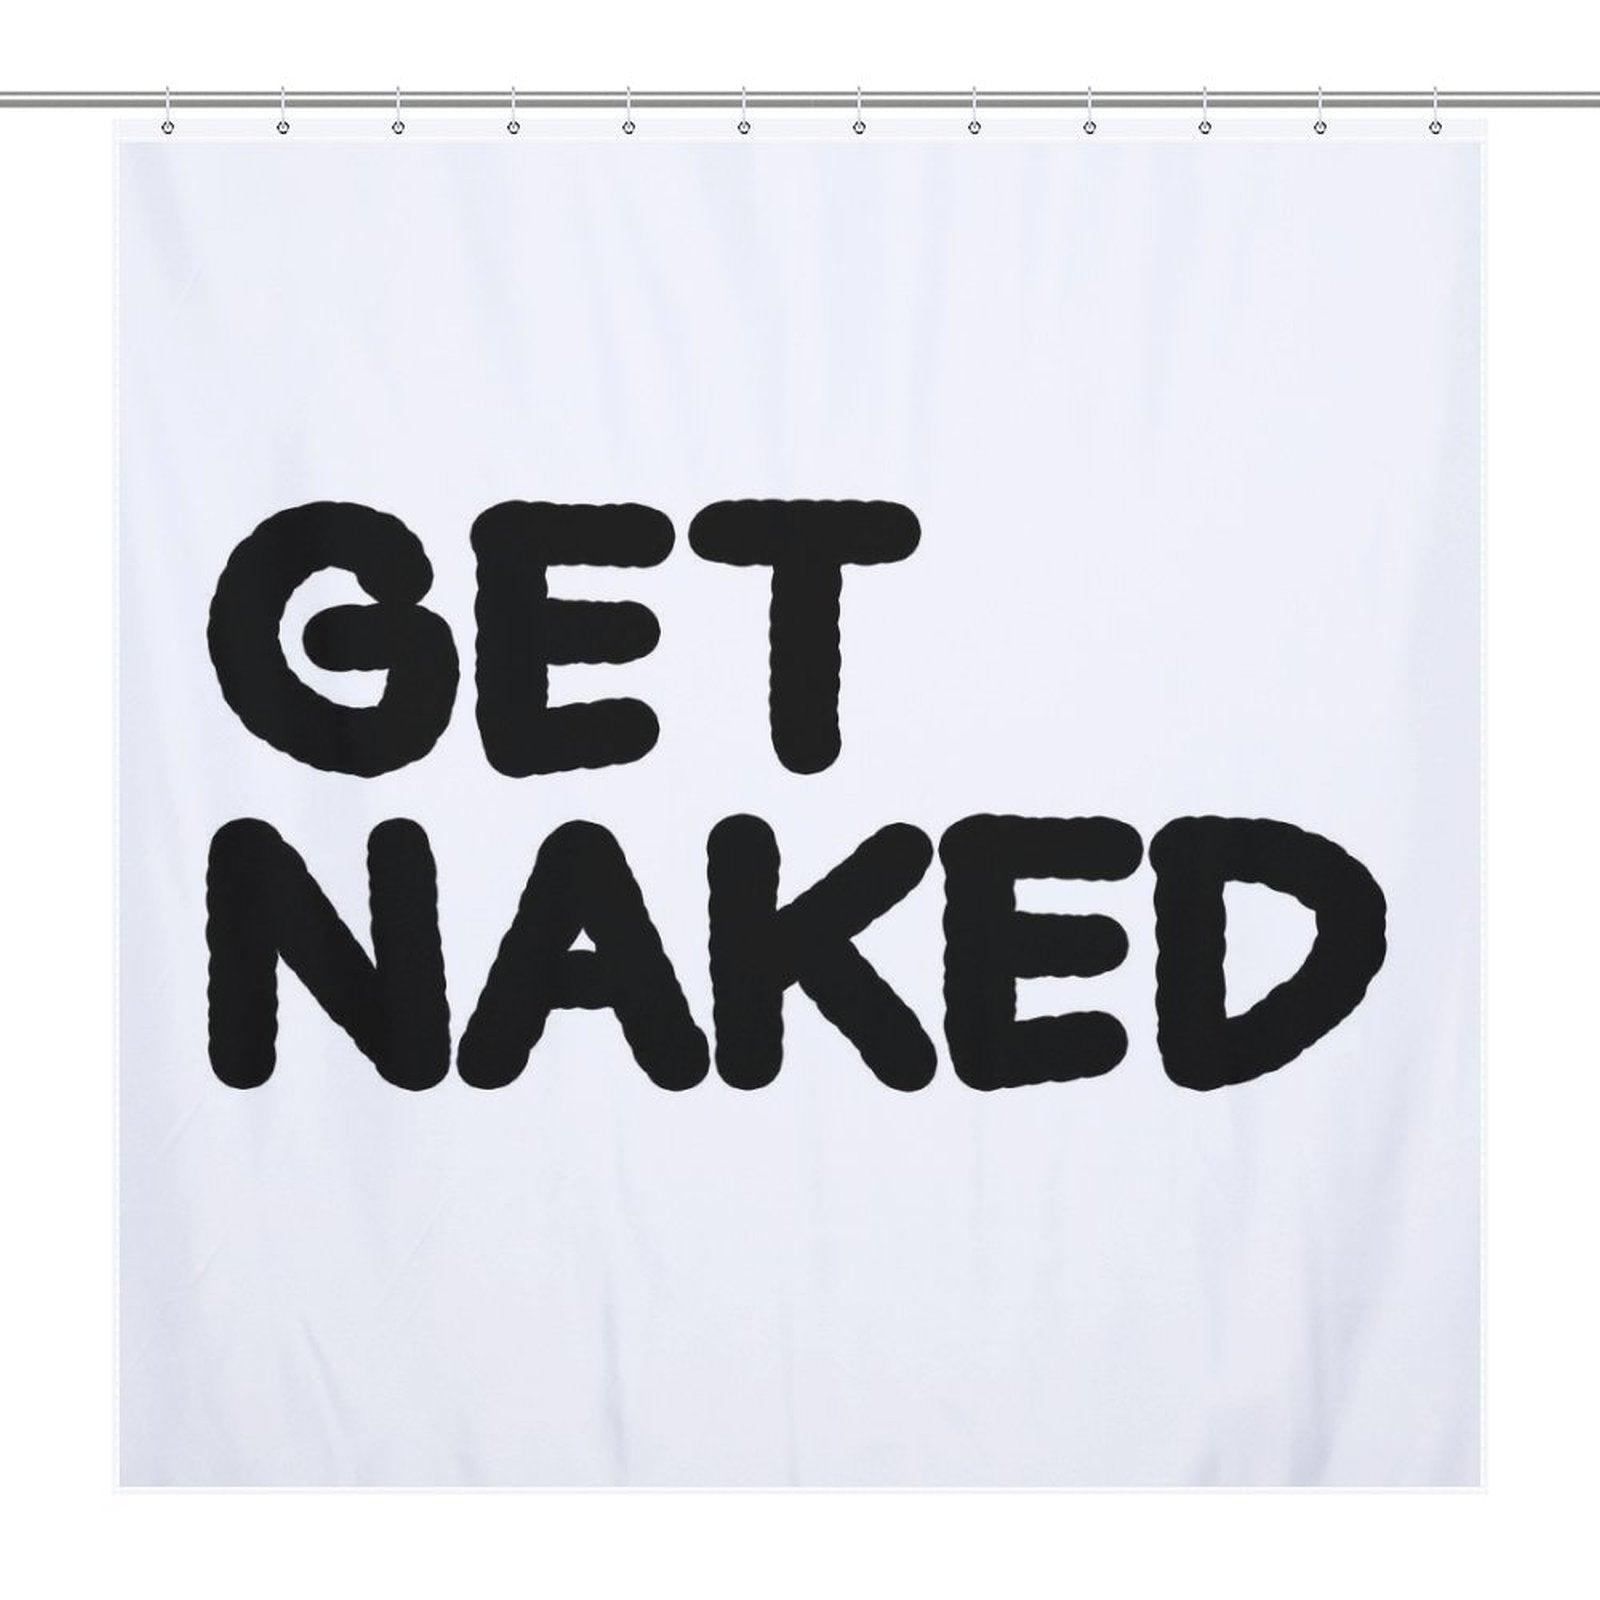 A white shower curtain with bold, black text reading "GET NAKED" adds a touch of humor and style to your bathroom. This Funny Letters Black and White Get Naked Shower Curtain-Cottoncat by Cotton Cat will surely make a statement while maintaining a sleek black-and-white design.